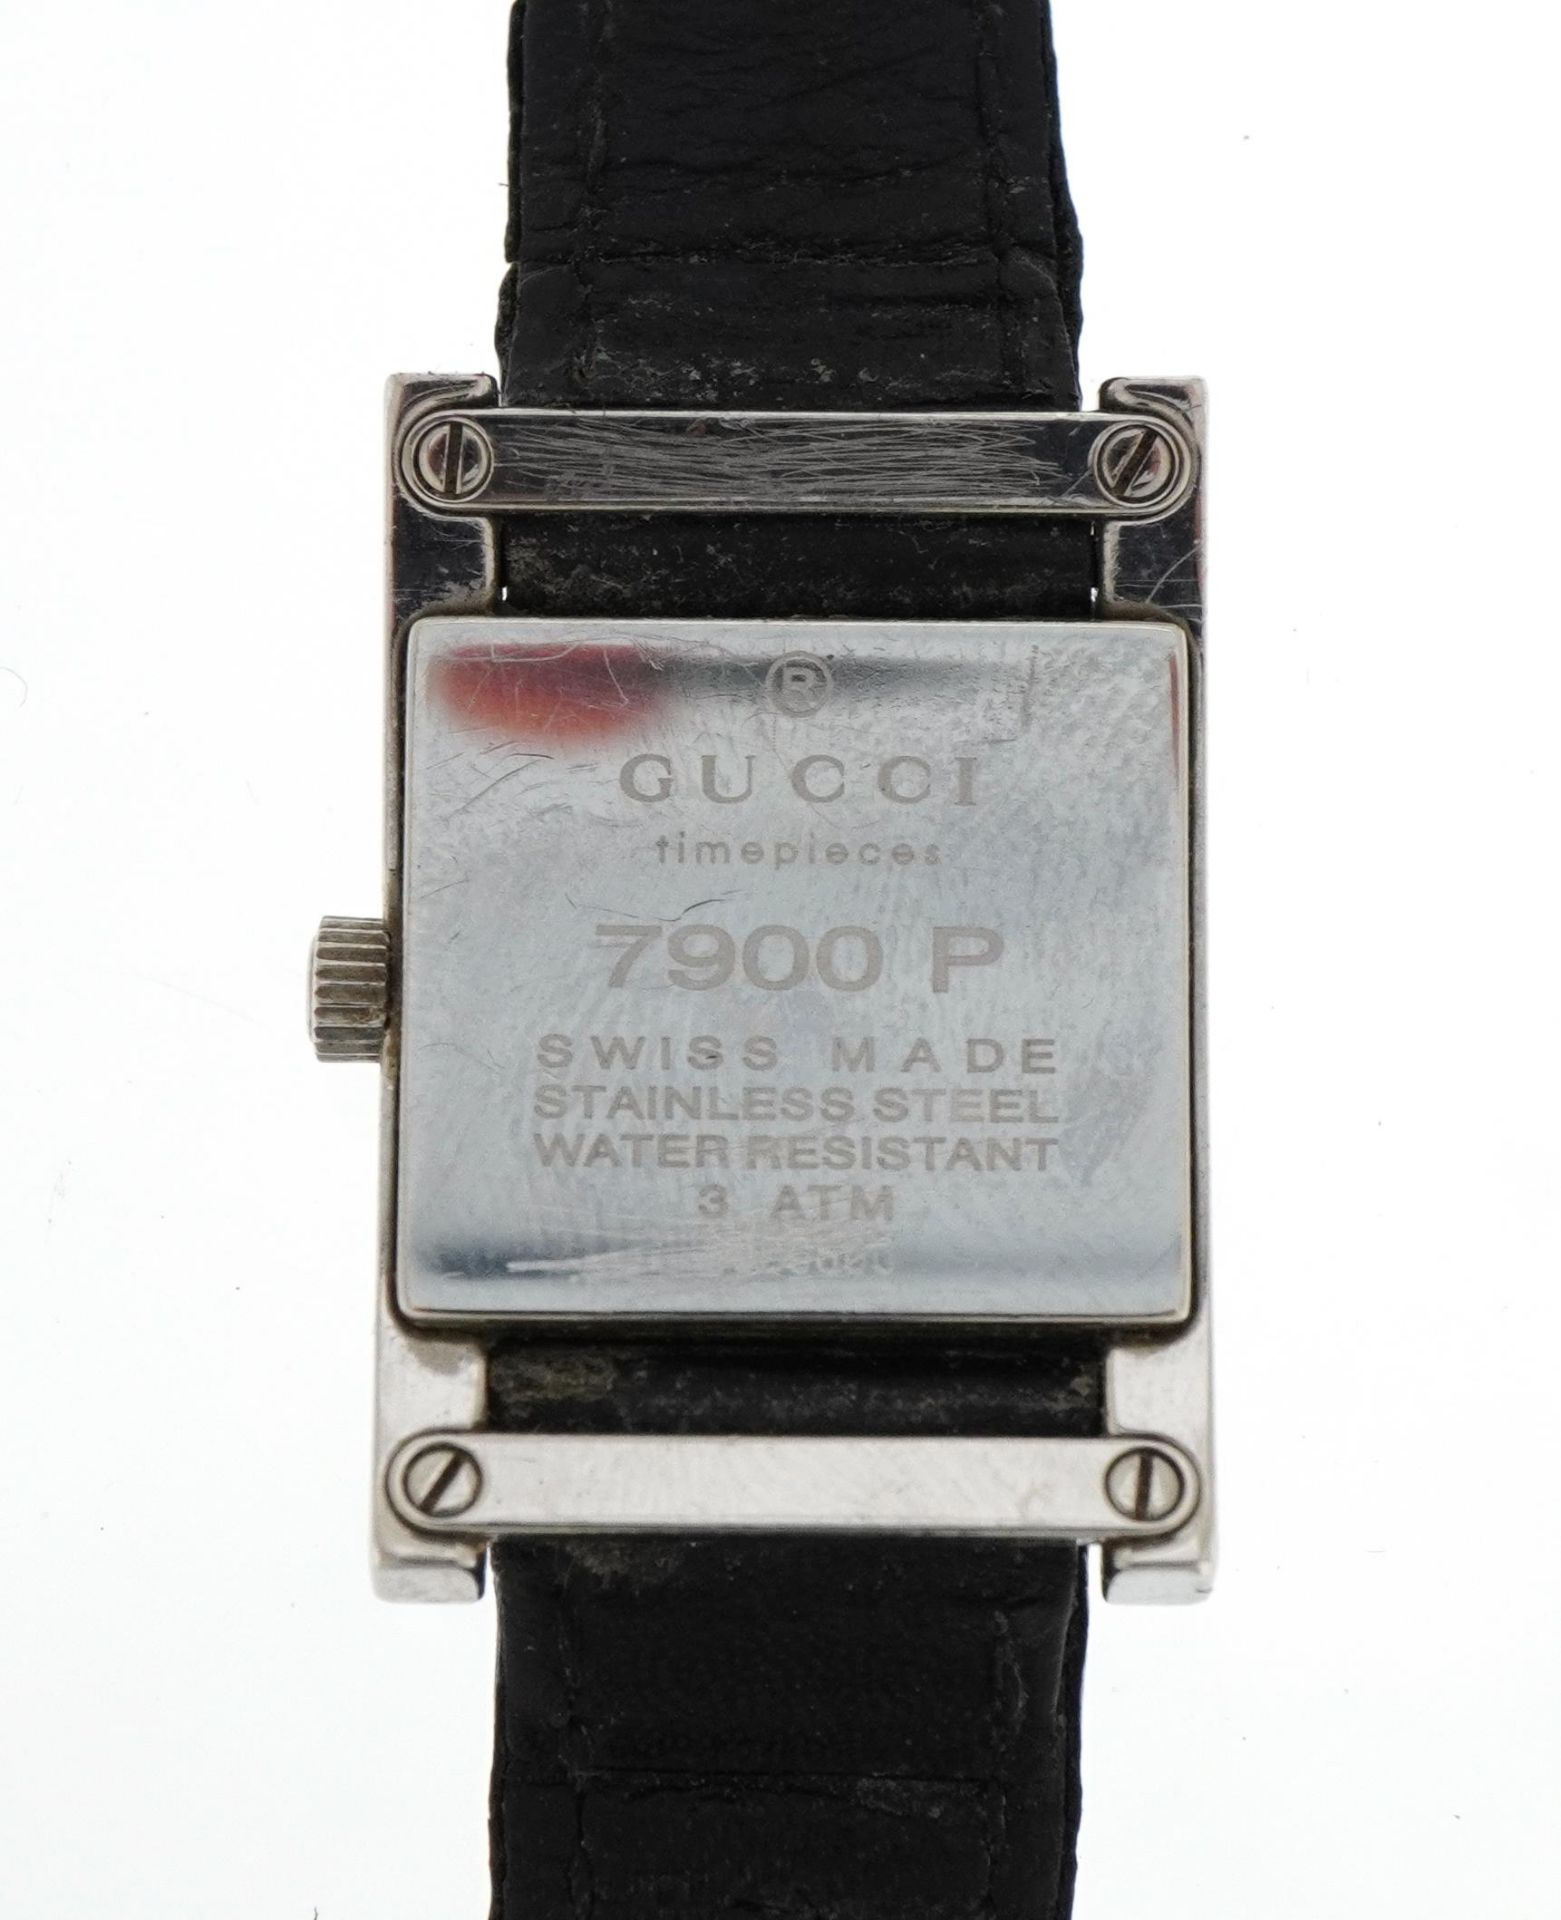 Gucci, ladies Gucci 7900P wristwatch, the case numbered 0000600, 20mm wide - Image 3 of 4